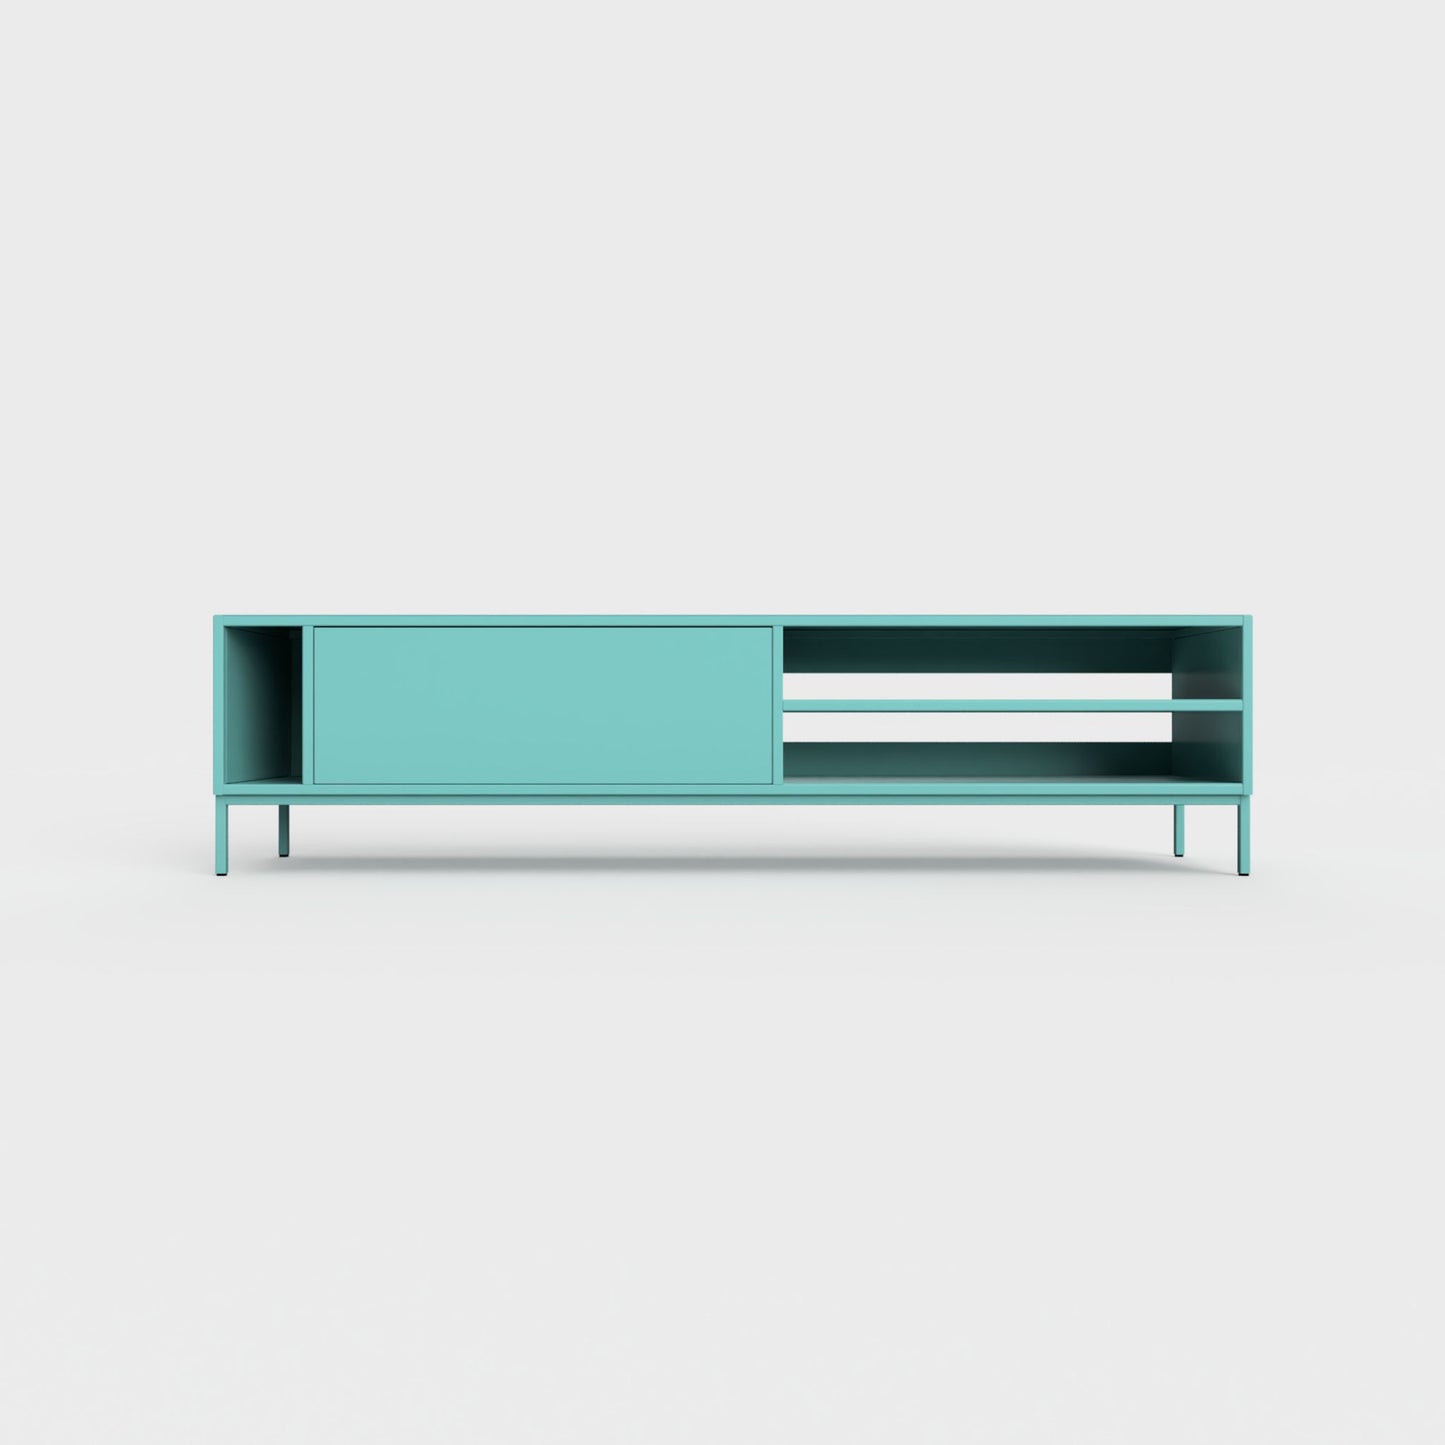 Prunus 03 Lowboard in forget me not blue green color, powder-coated steel, elegant and modern piece of furniture for your living room